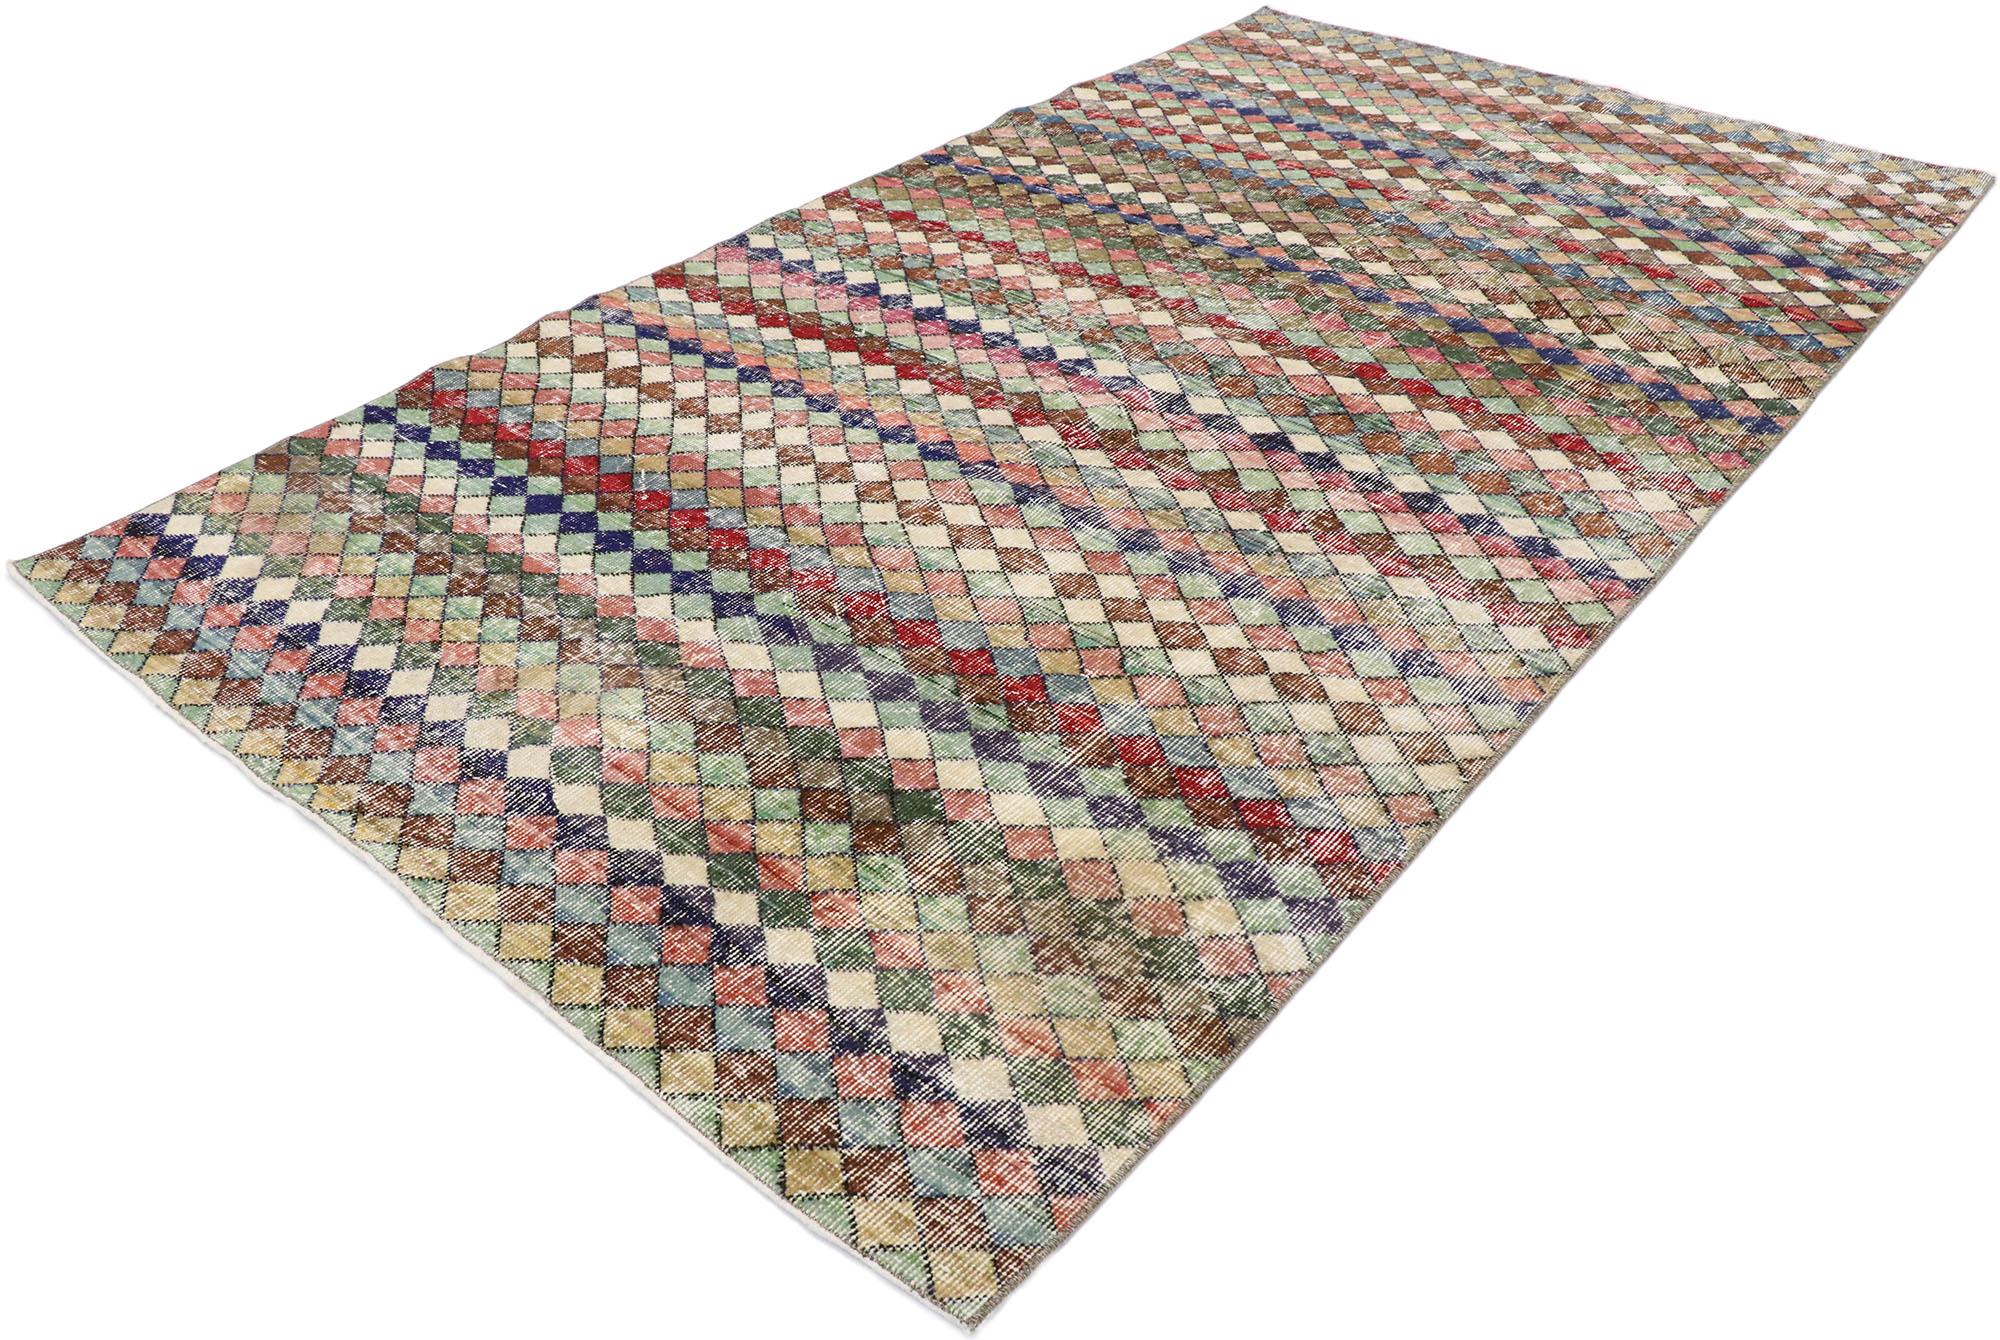 53333, distressed vintage Turkish Sivas rug with Rustic Mid-Century Modern style. This hand knotted wool distressed vintage Turkish Sivas rug features an all-over checkered stripe pattern comprised of rows of multicolored diamonds. Each row of